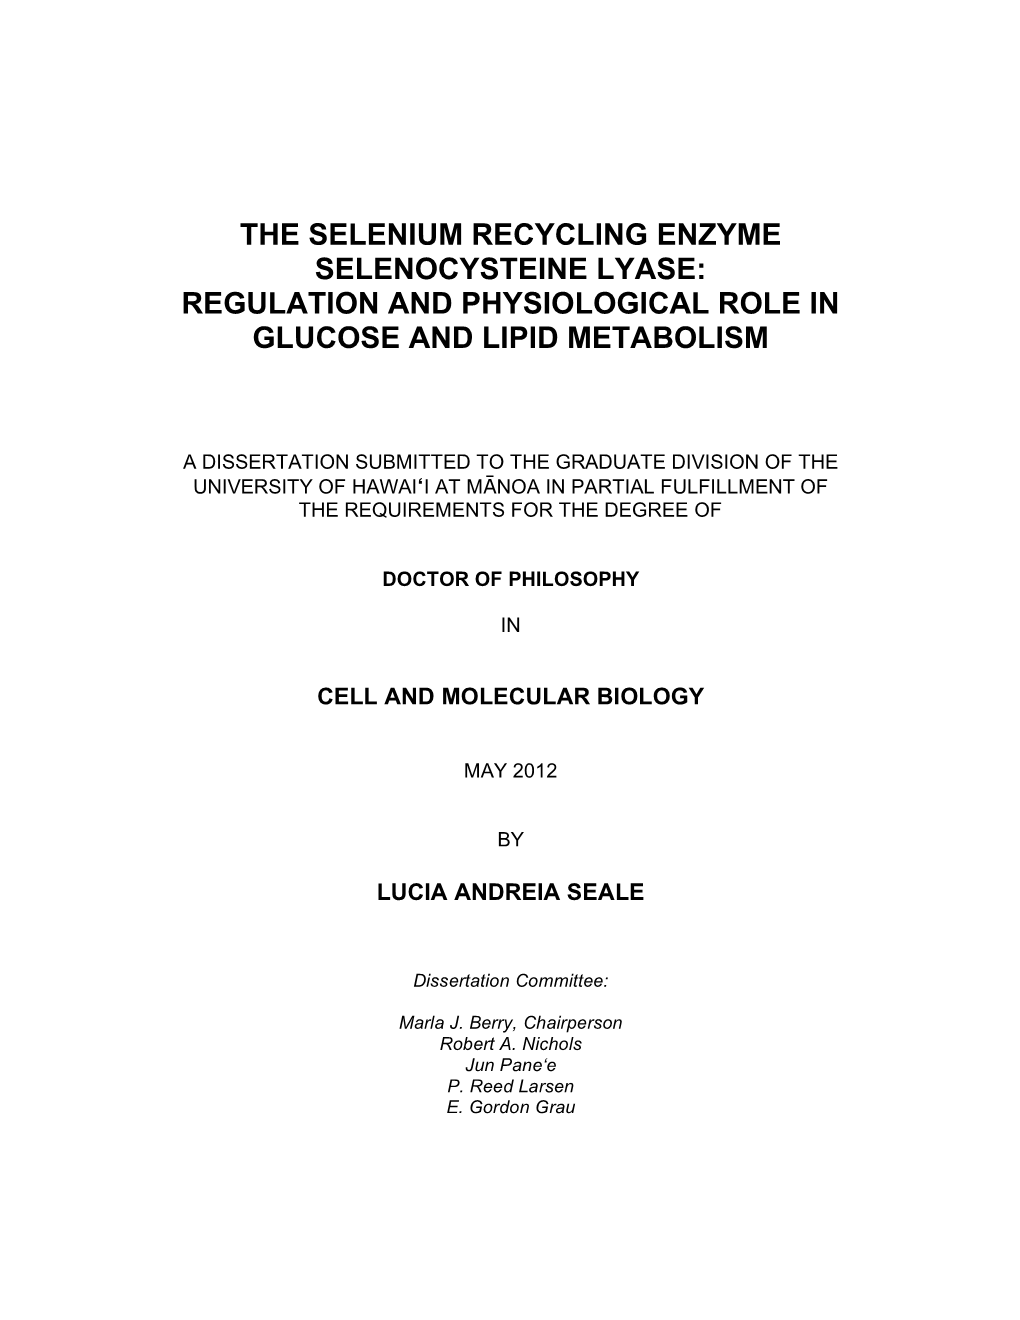 The Selenium Recycling Enzyme Selenocysteine Lyase: Regulation and Physiological Role in Glucose and Lipid Metabolism